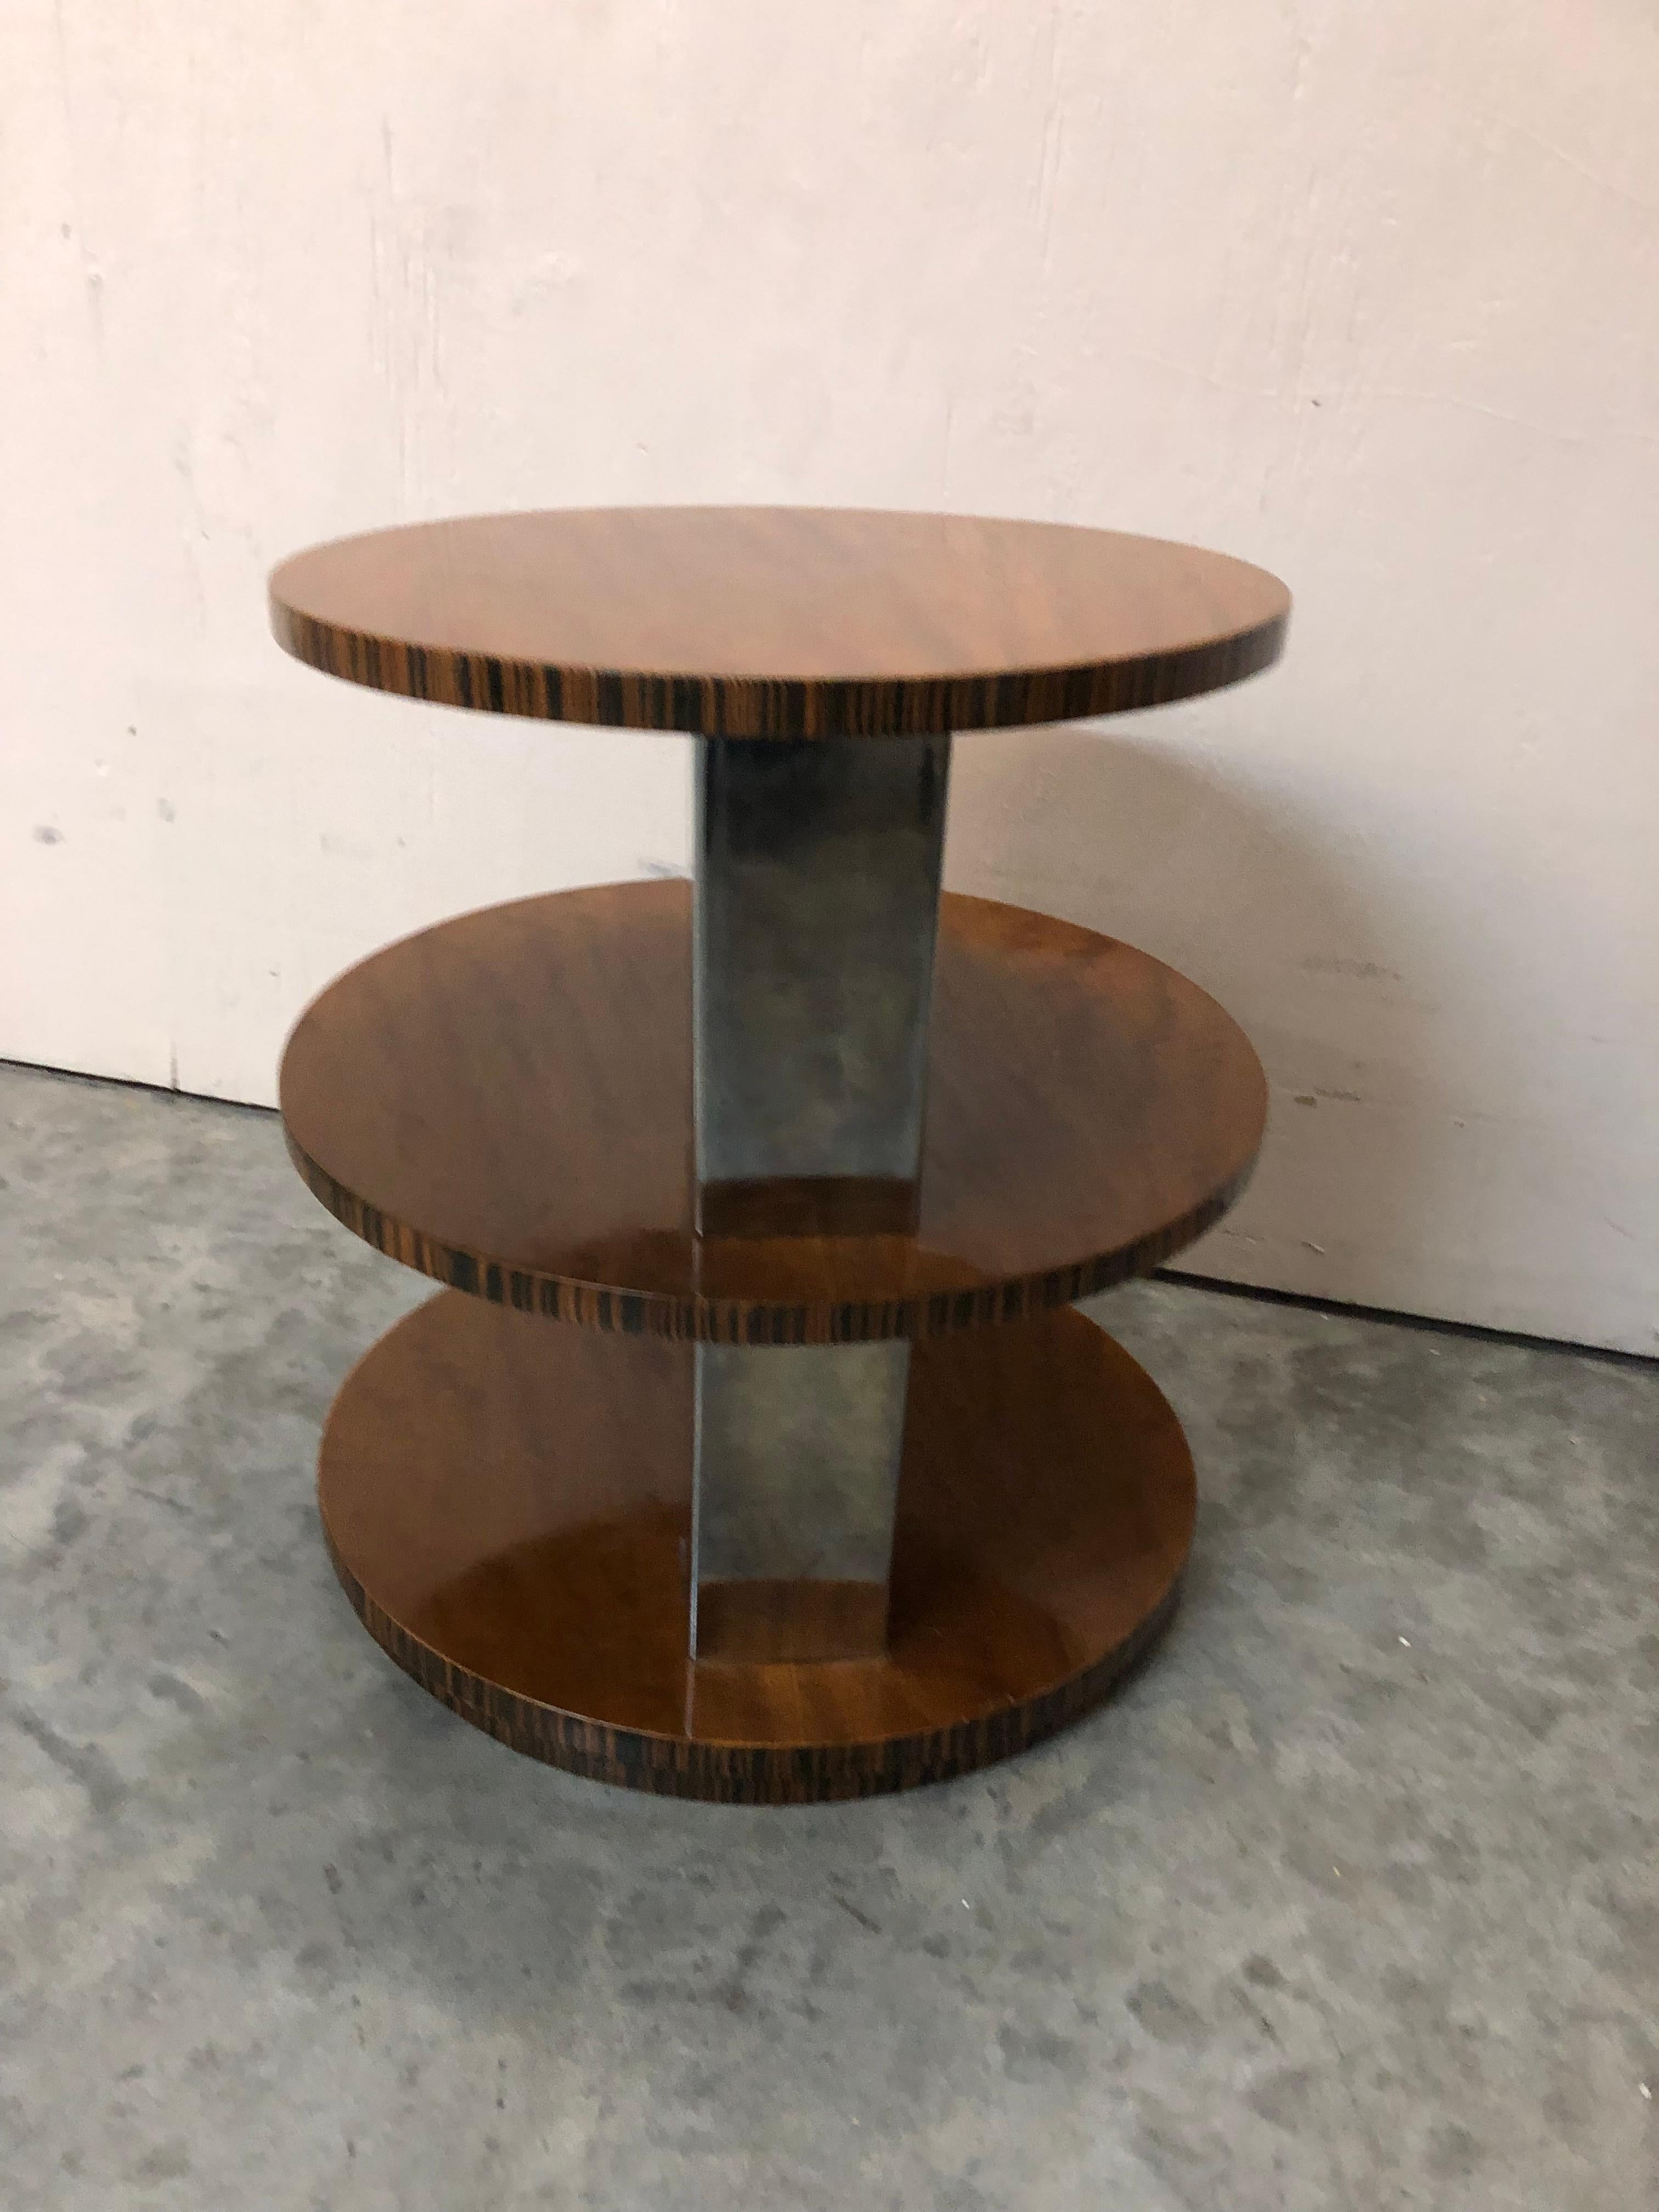 Three Tier Table 'Attributed to the Bauhaus' German For Sale 13